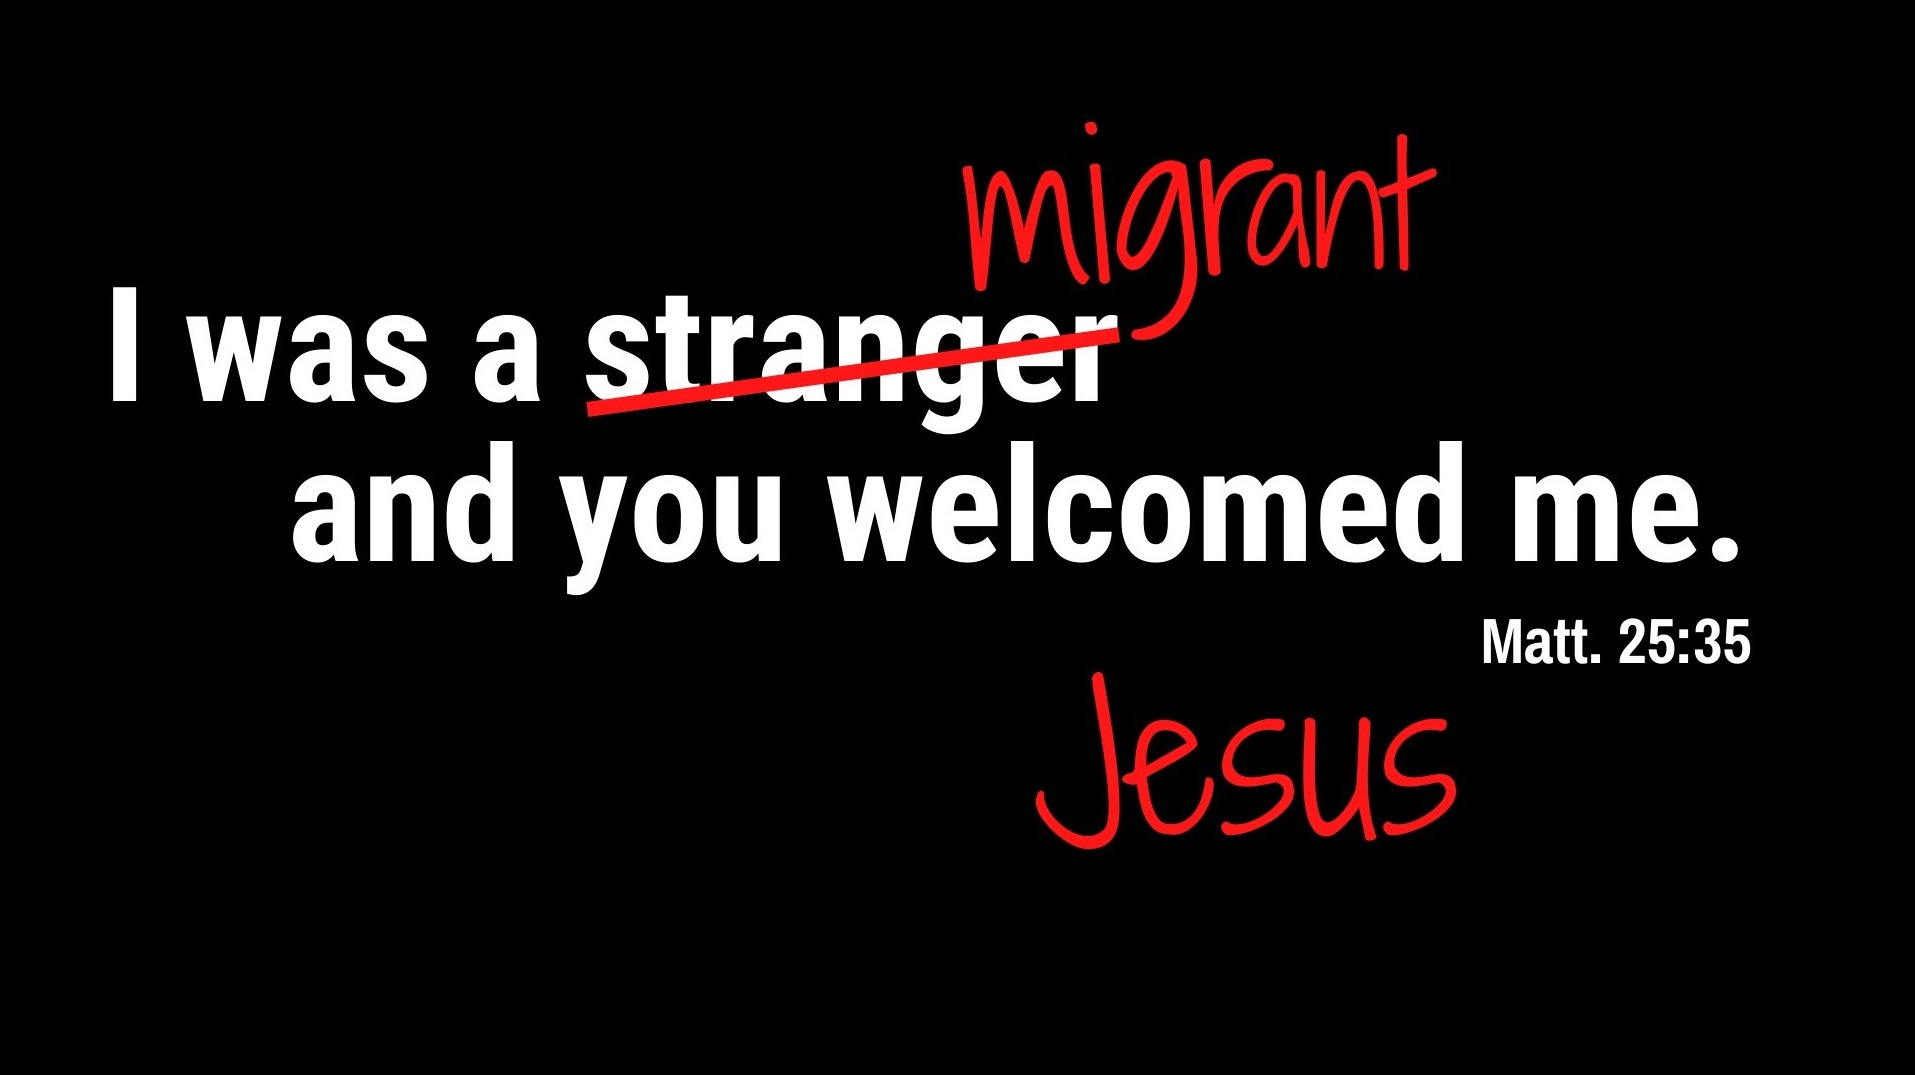 Migrant Welcome